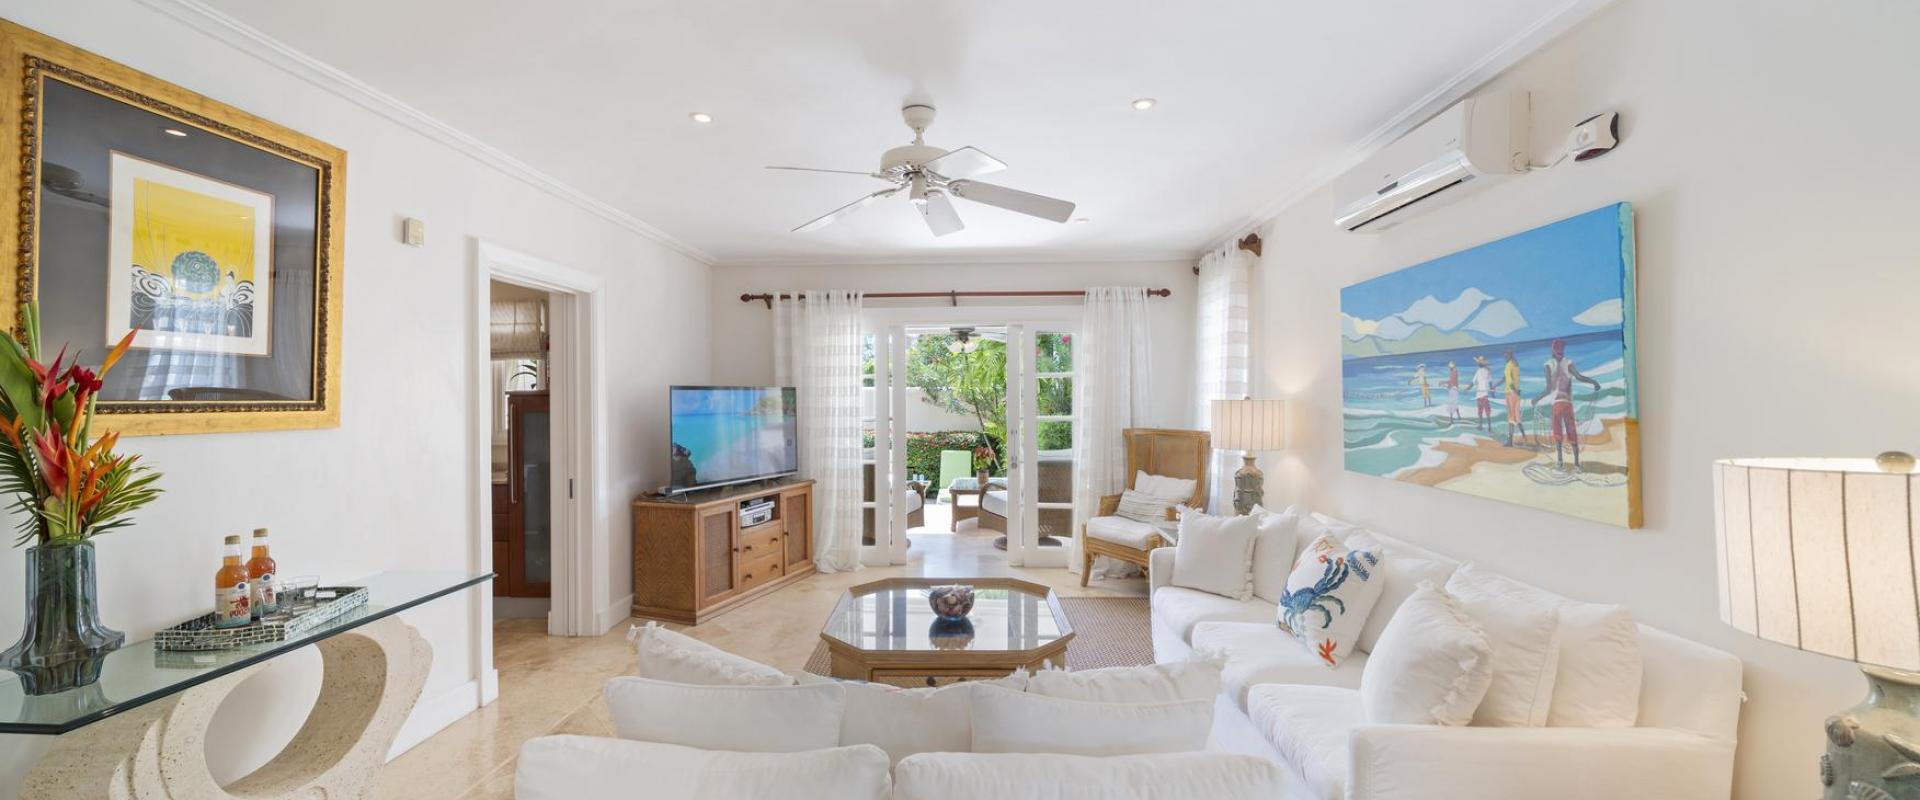 Hummingbird Villa Mullins Bay Barbados Living Room with Couch Seating